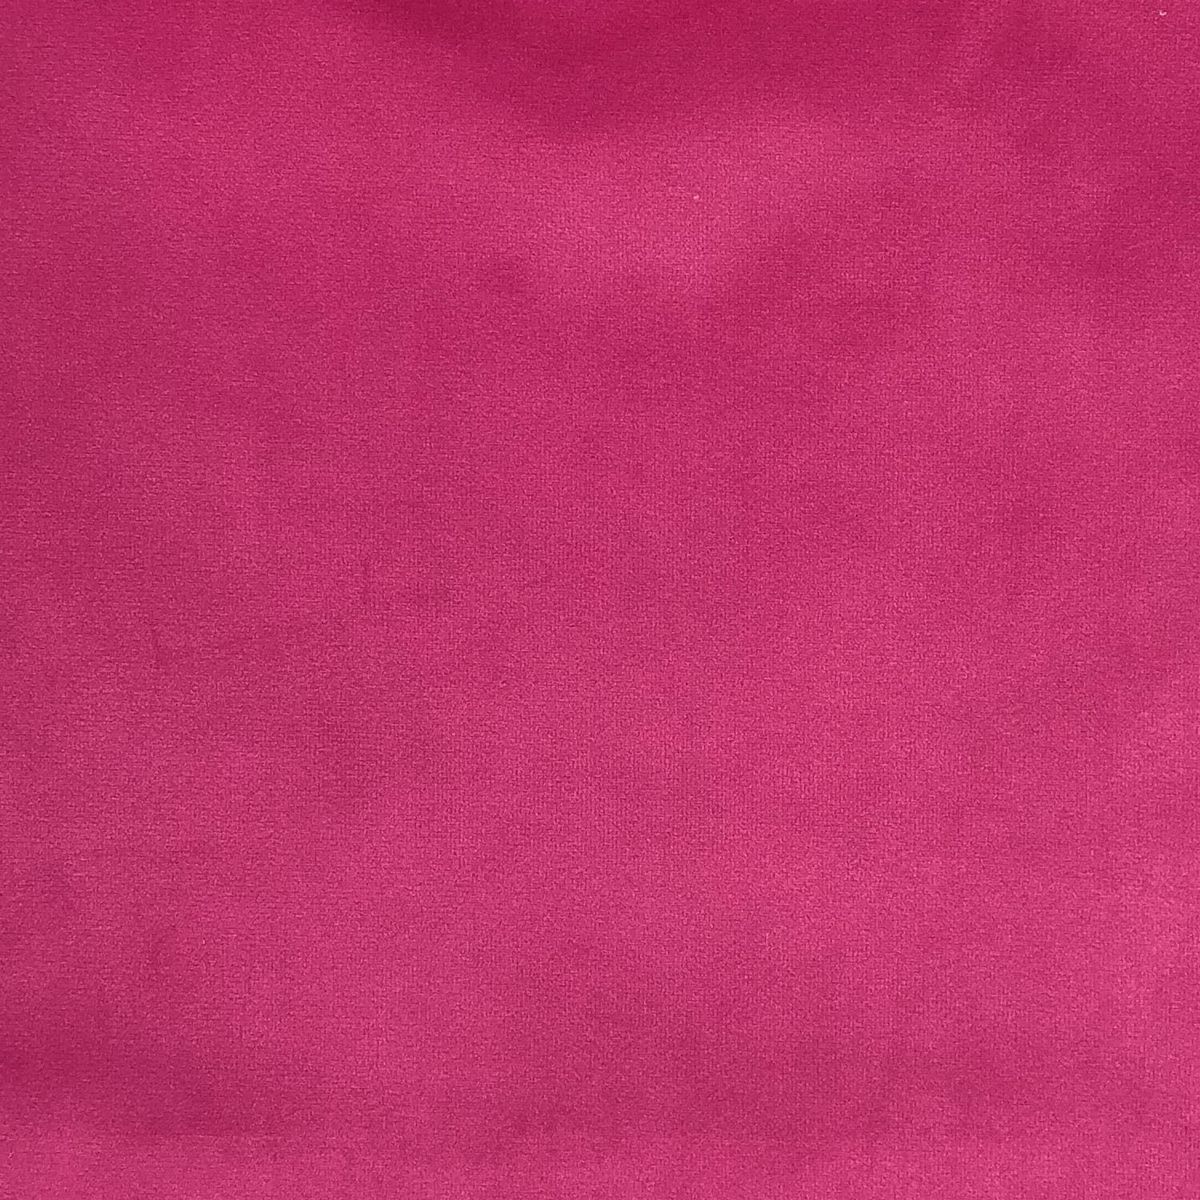 London Hot Pink Fabric by Chatham Glyn